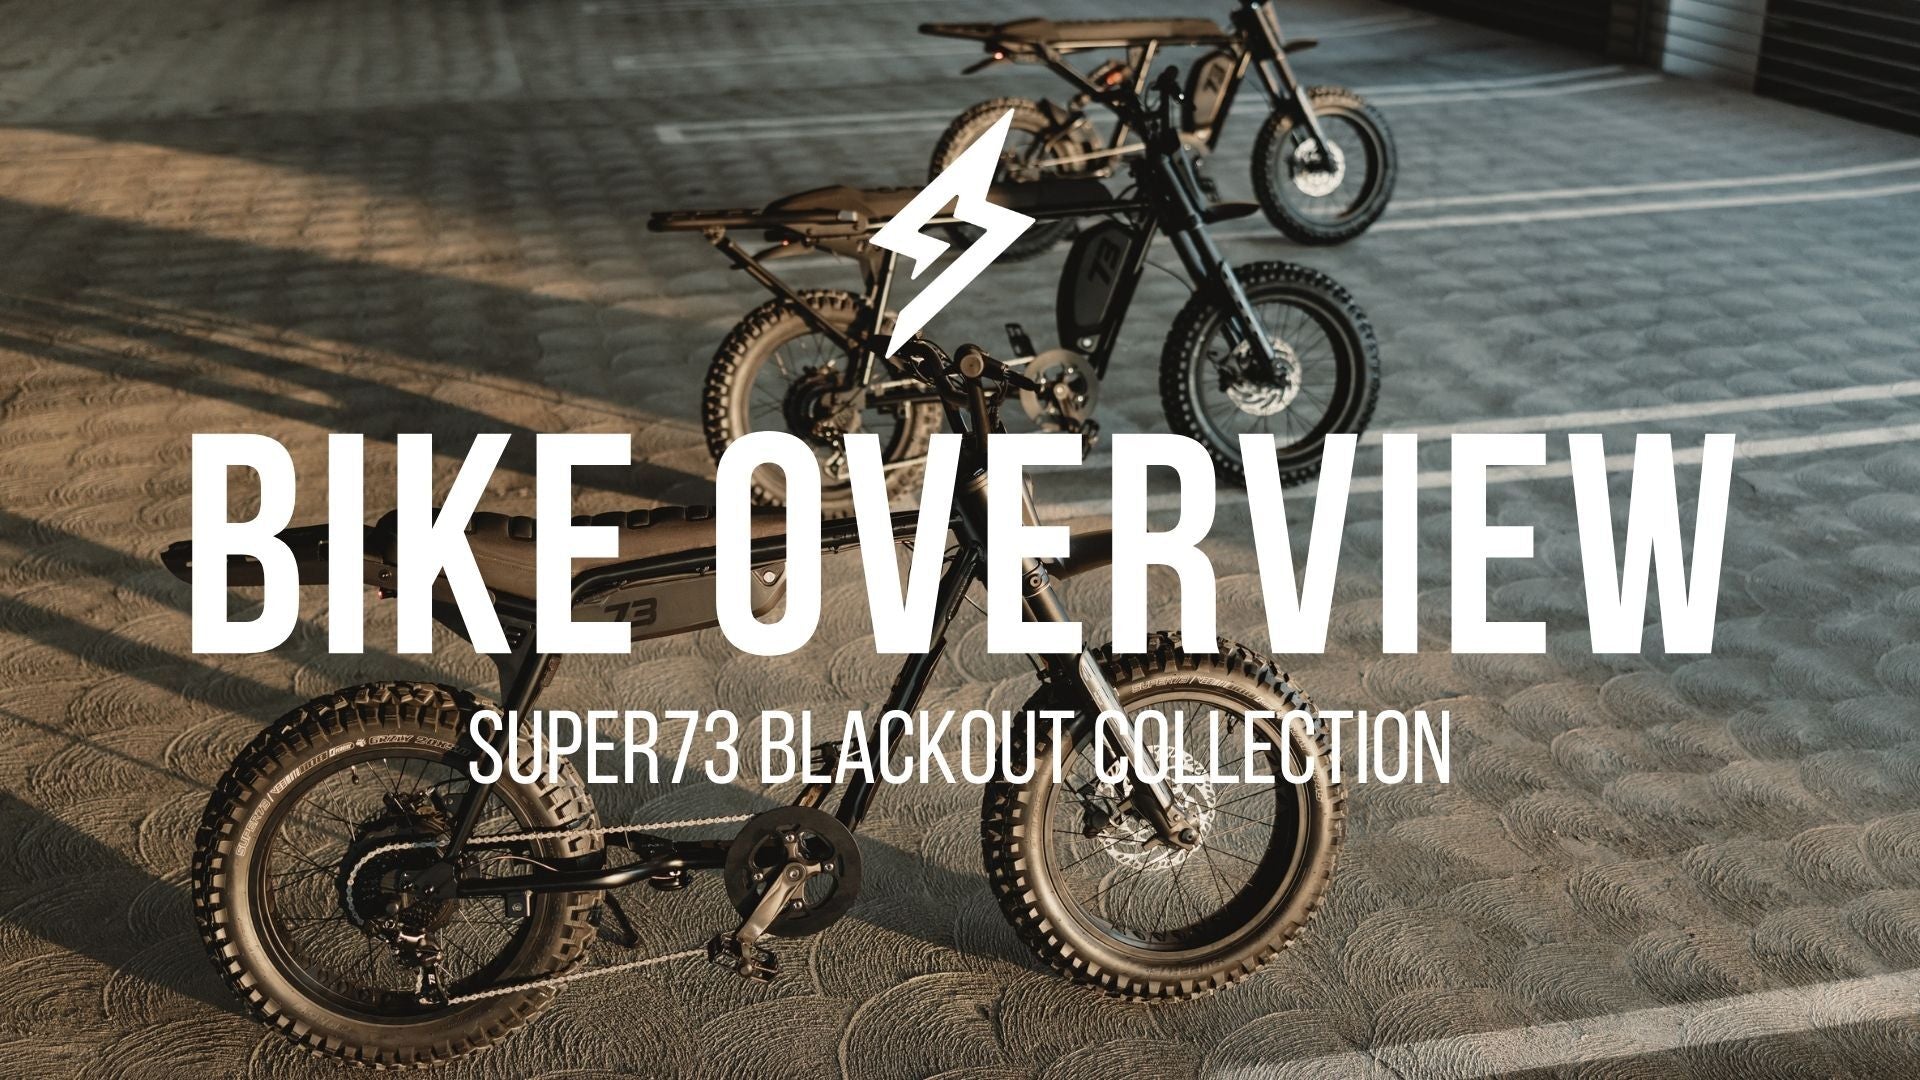 Thumbnail image for the Blackout Collection Overview video.